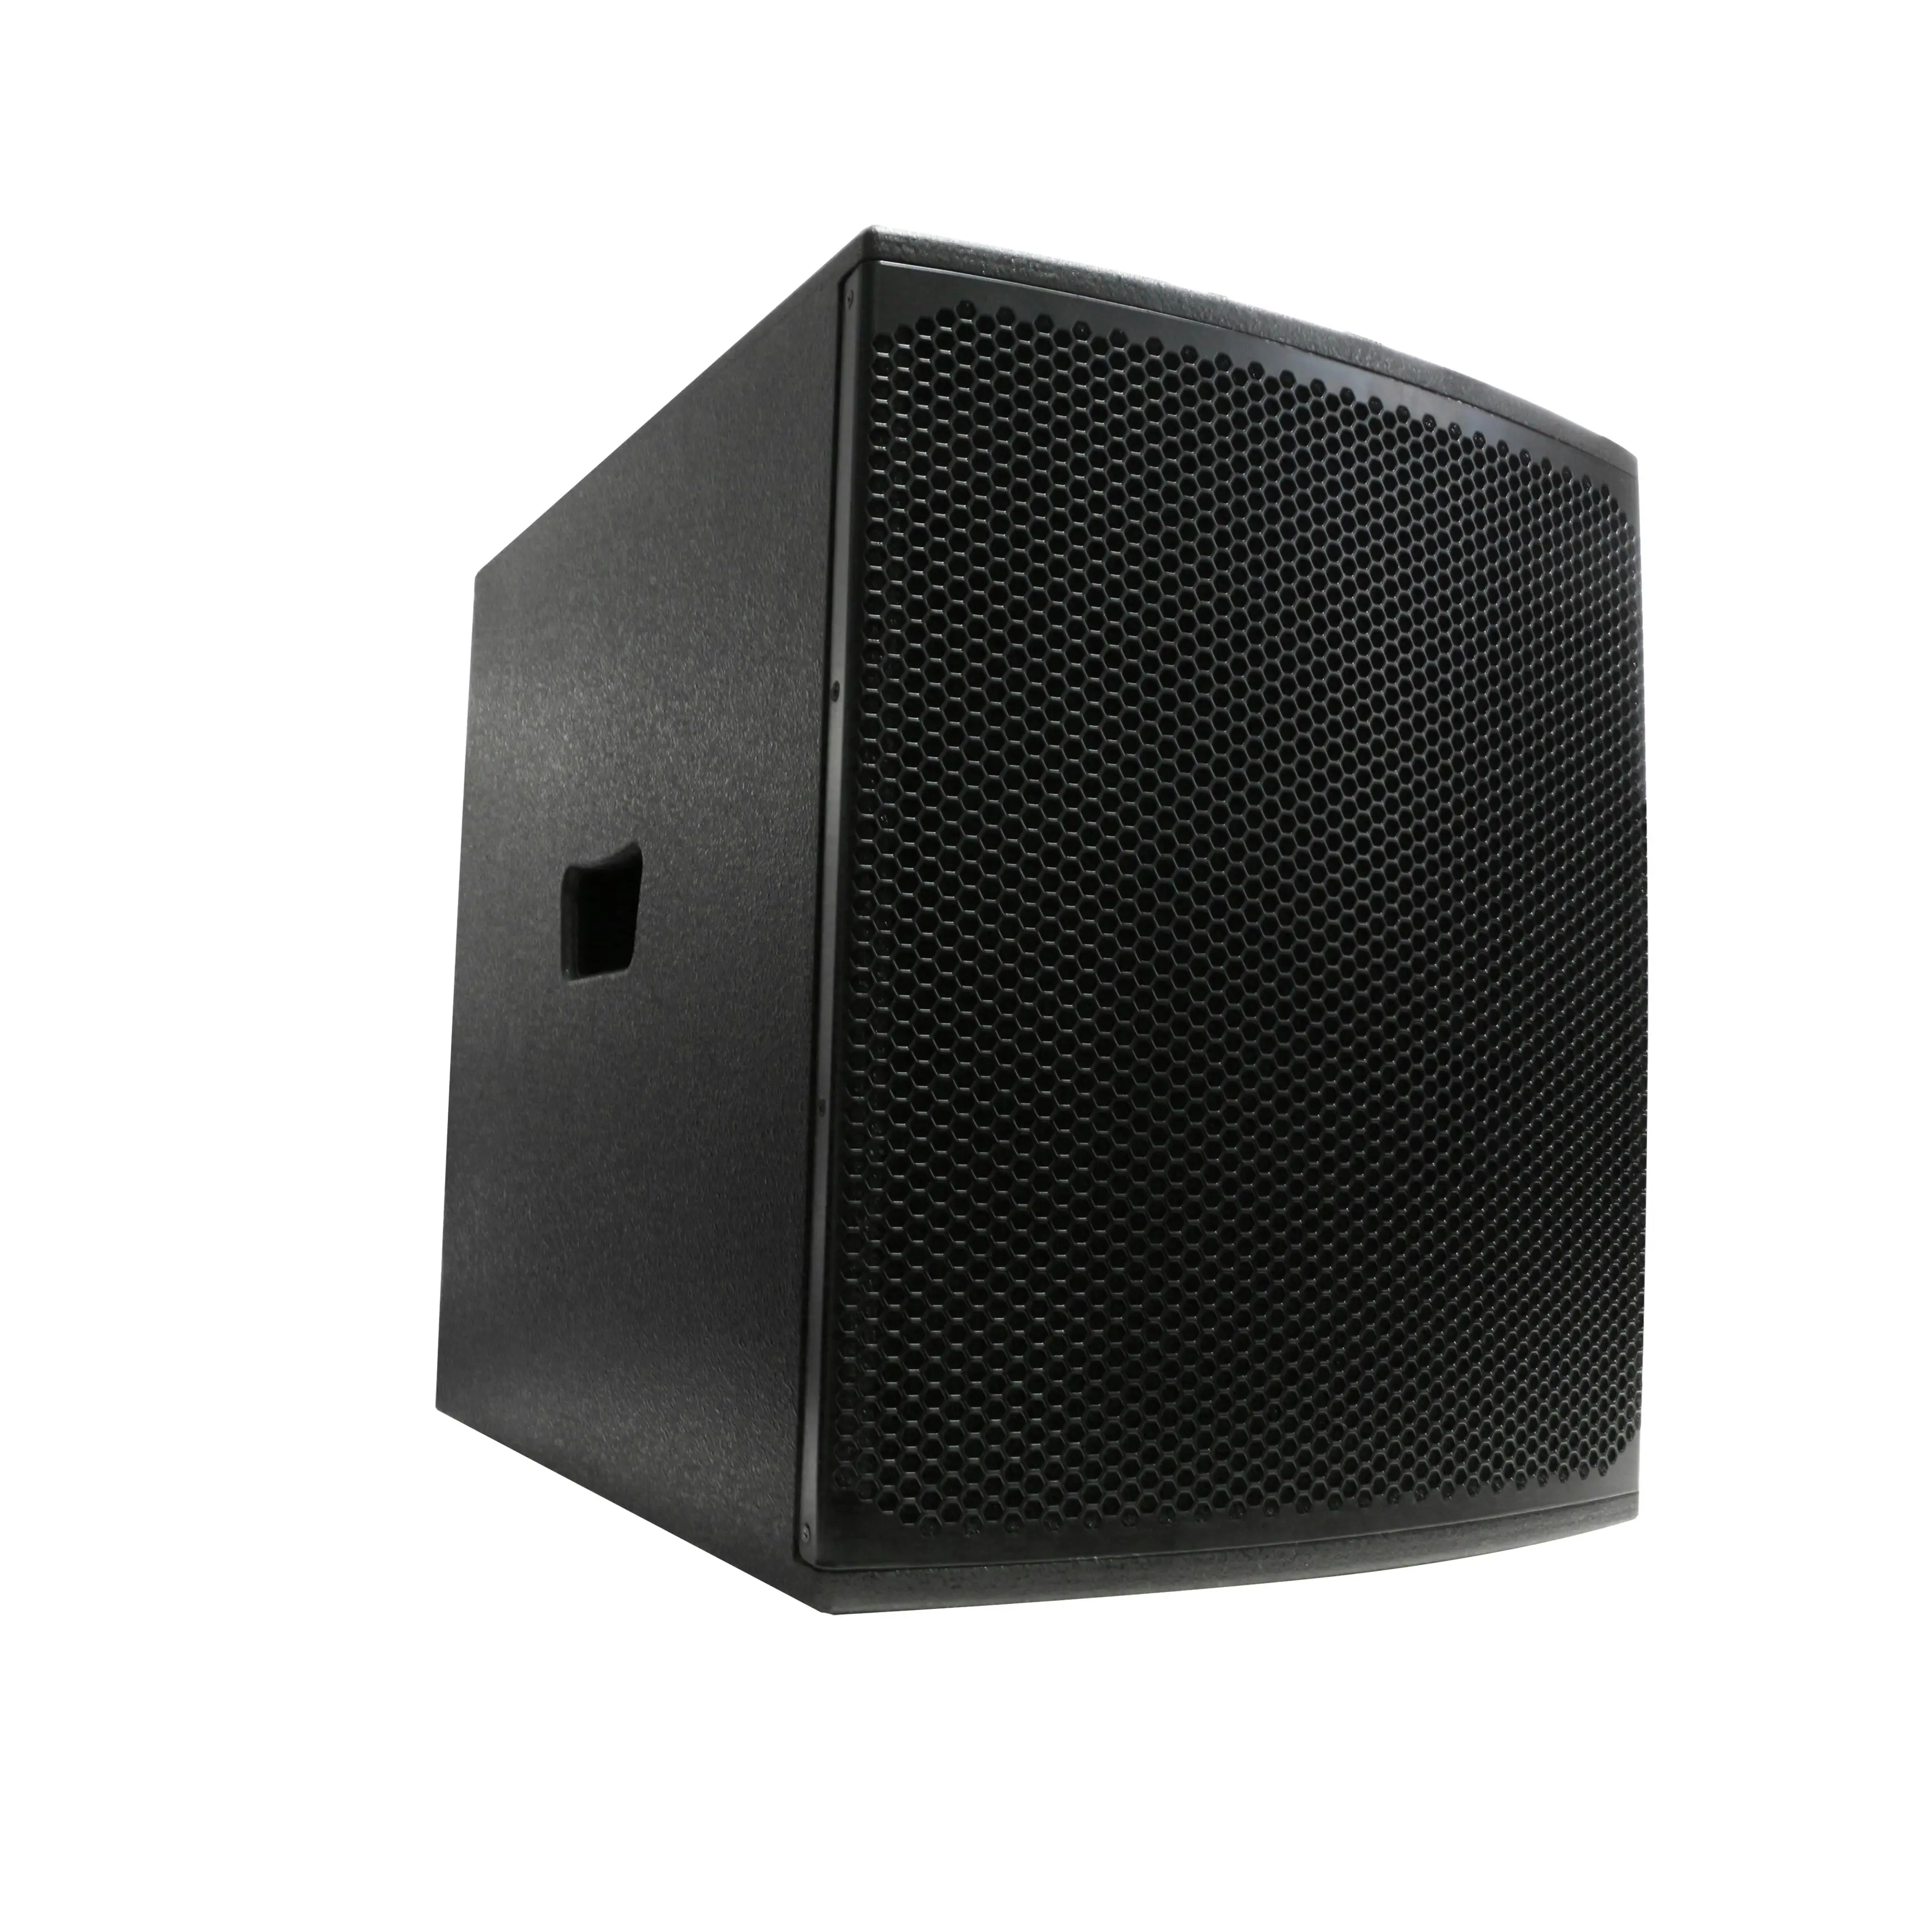 AS 18 Inch class d amplifier powered speaker box accessories professional audio active woofer subwoofer speaker